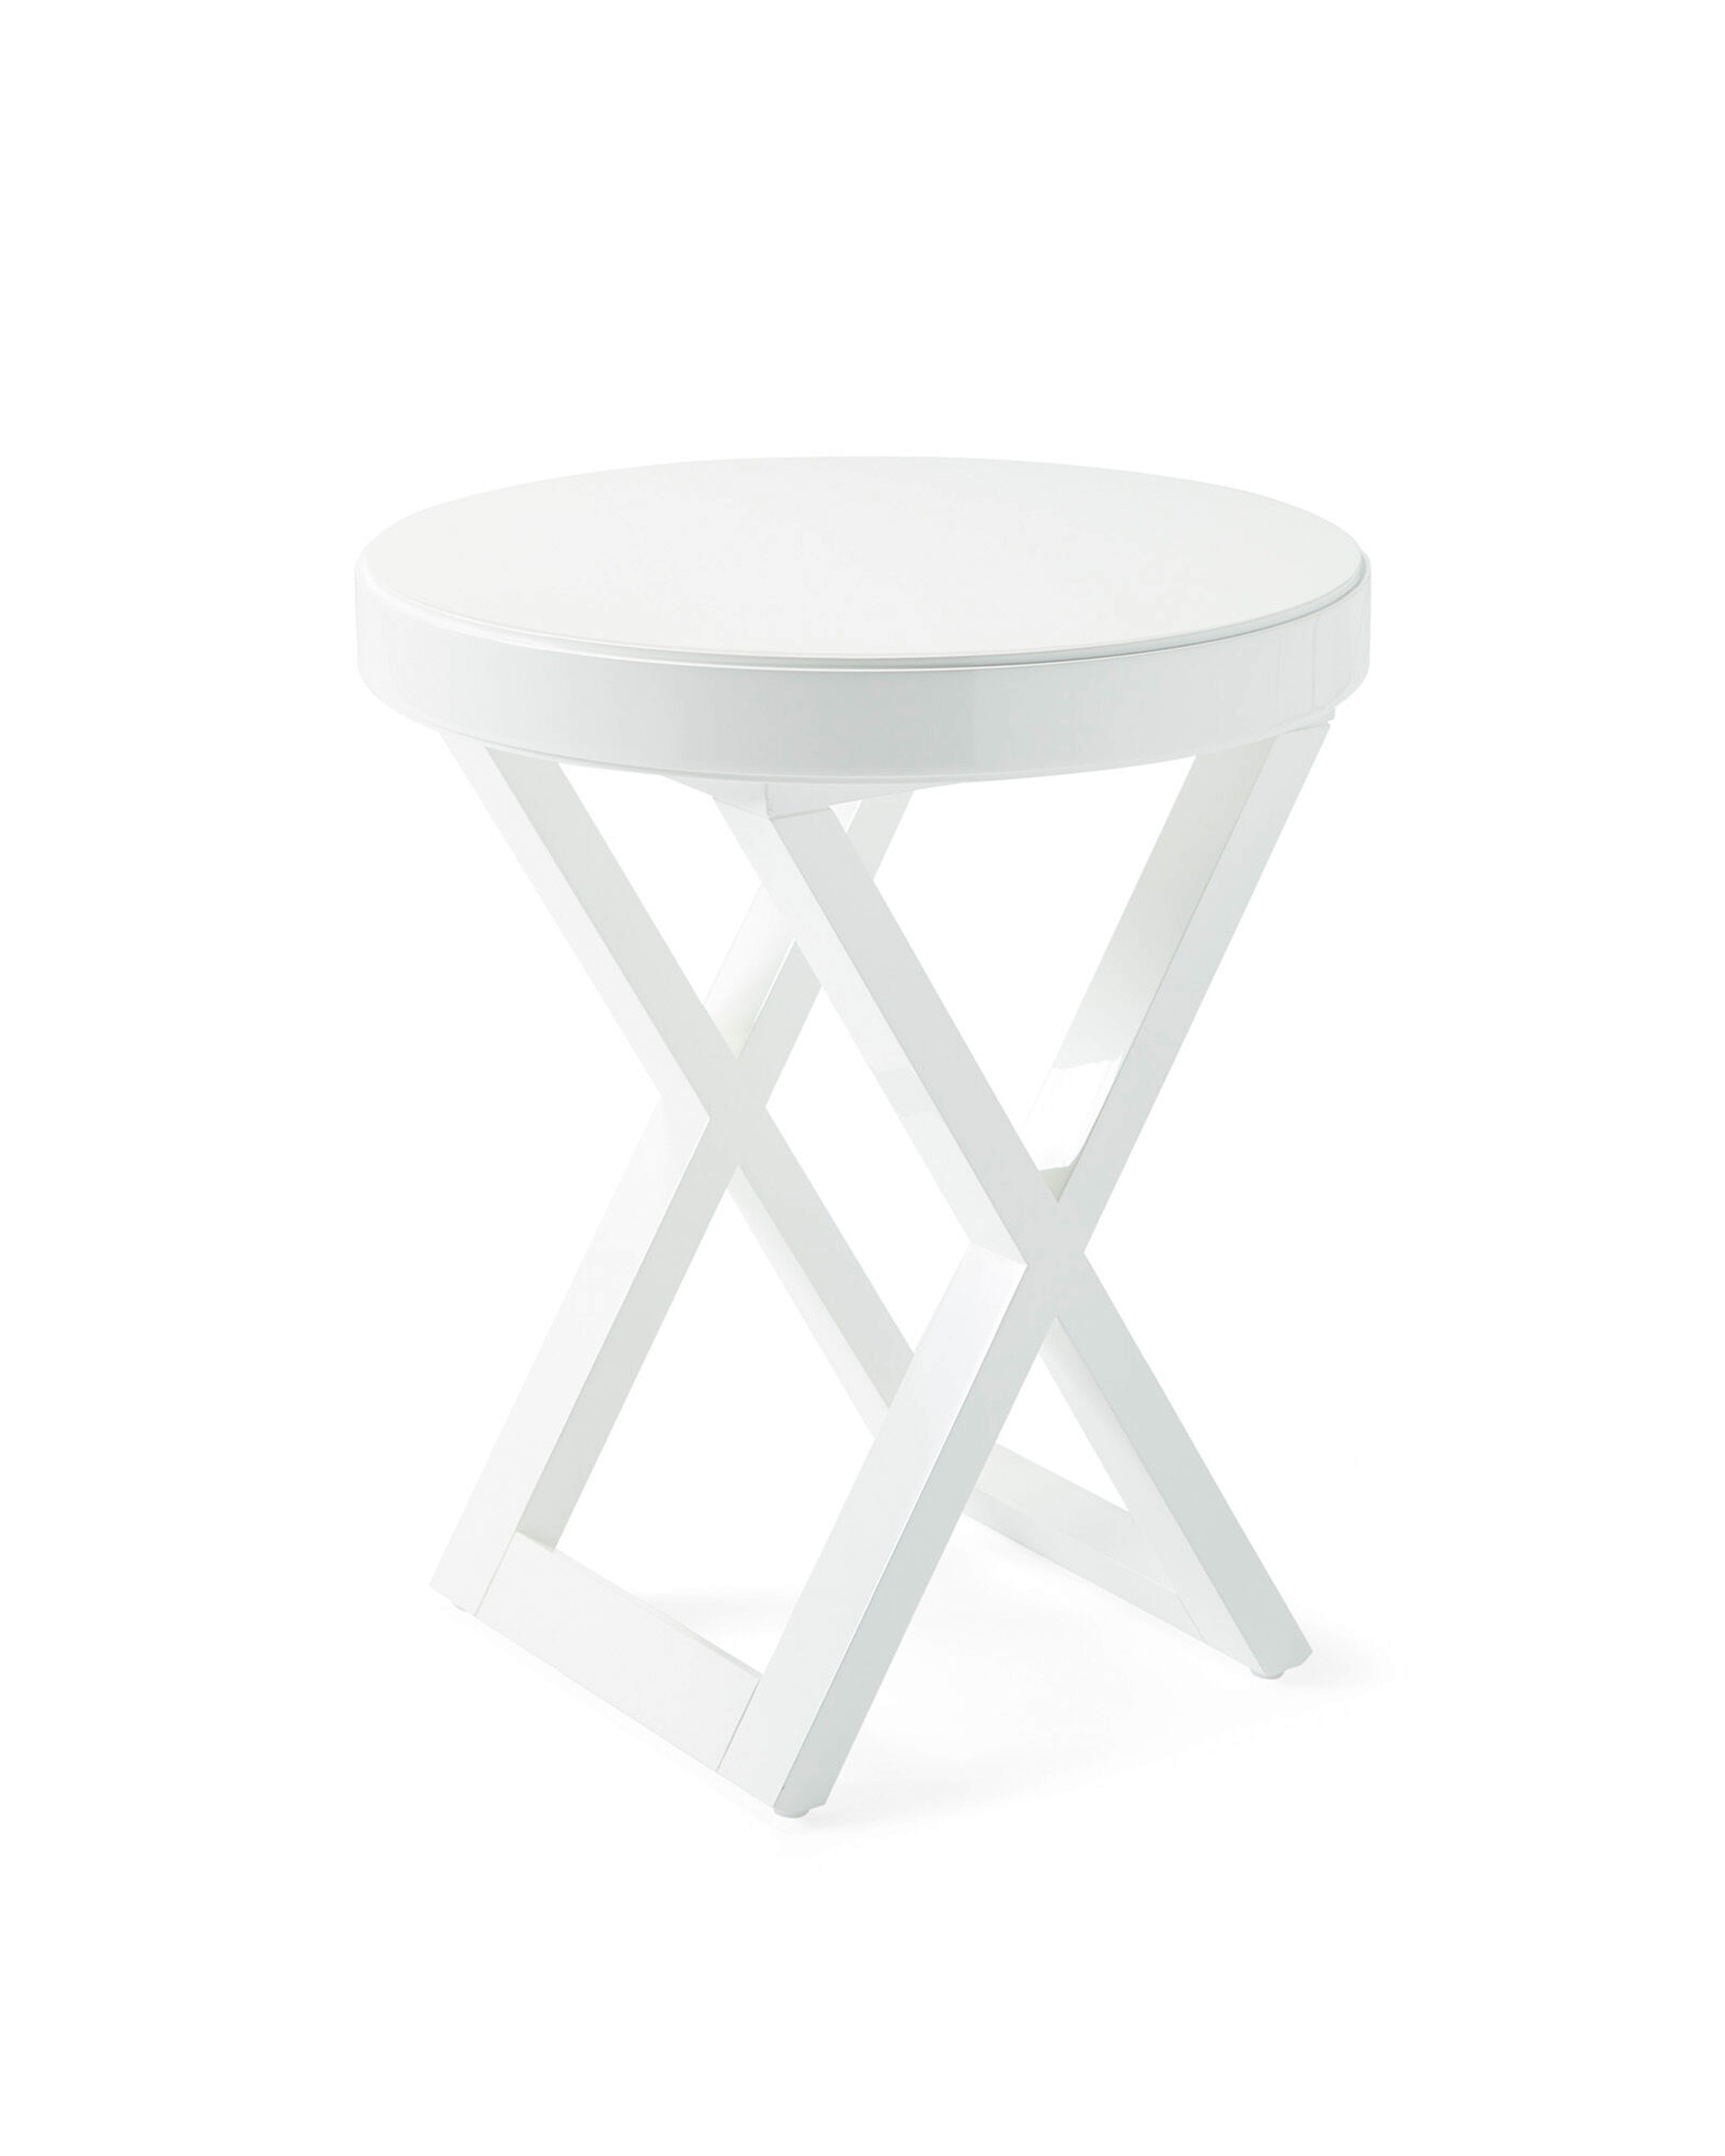 Atelier Round Side Table - Serena and Lily